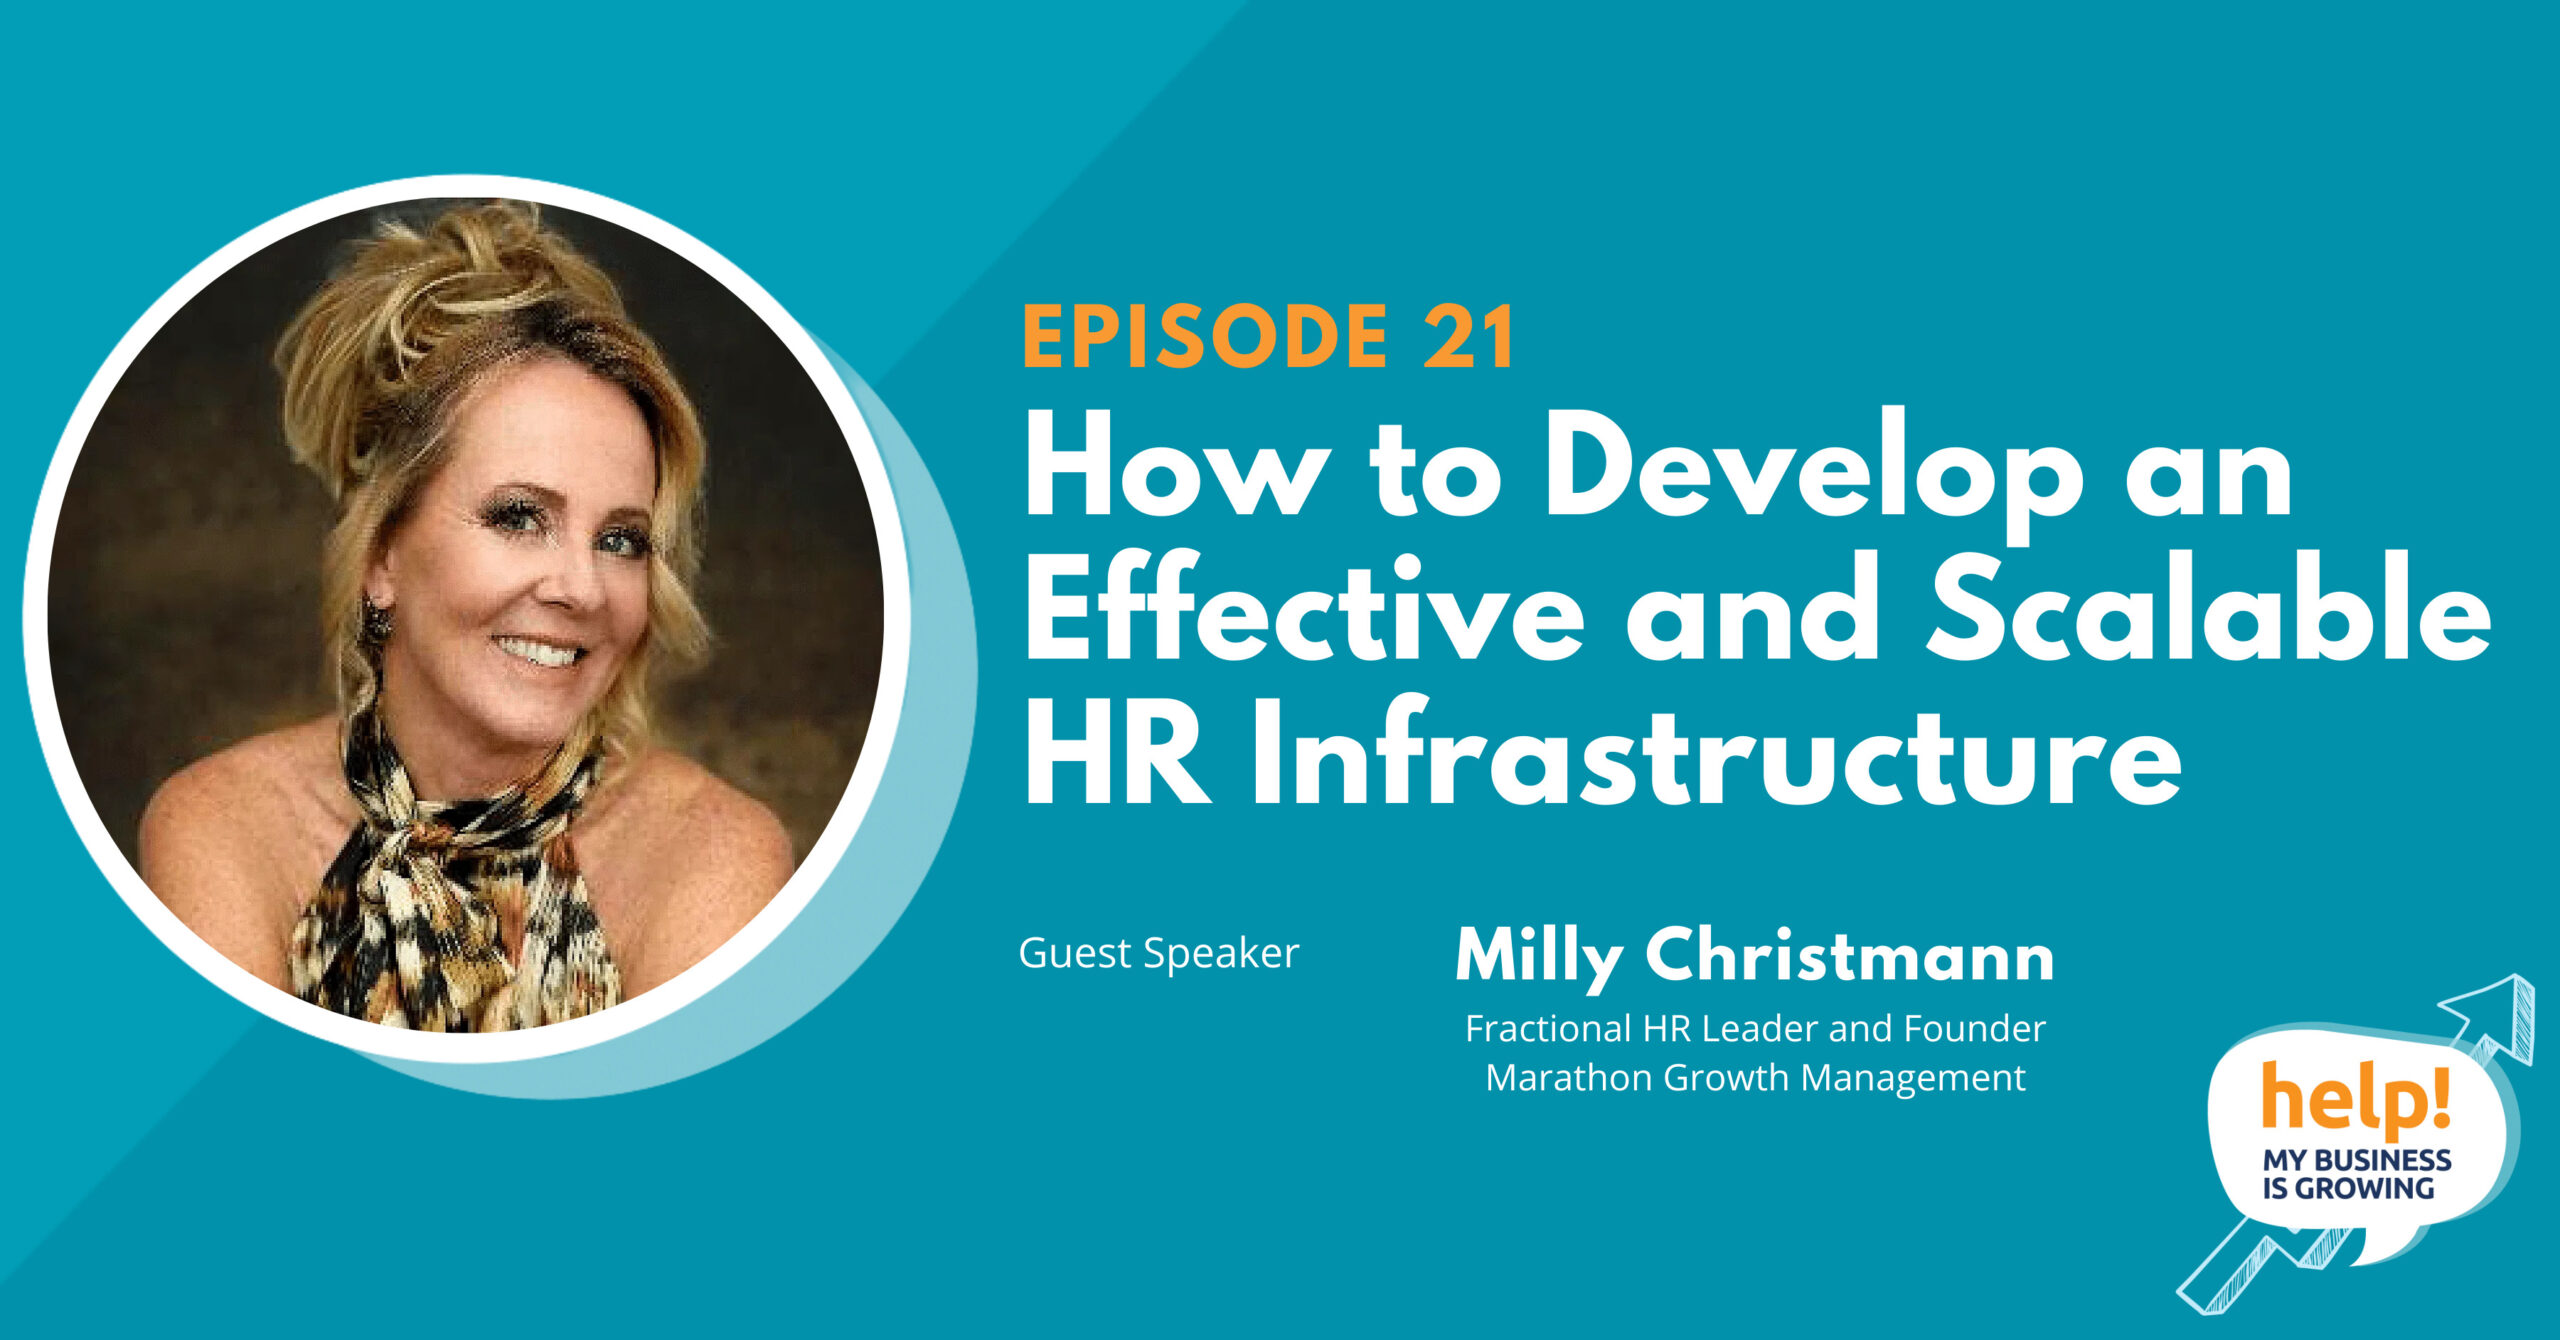 How to Develop an Effective and Scalable HR Infrastructure